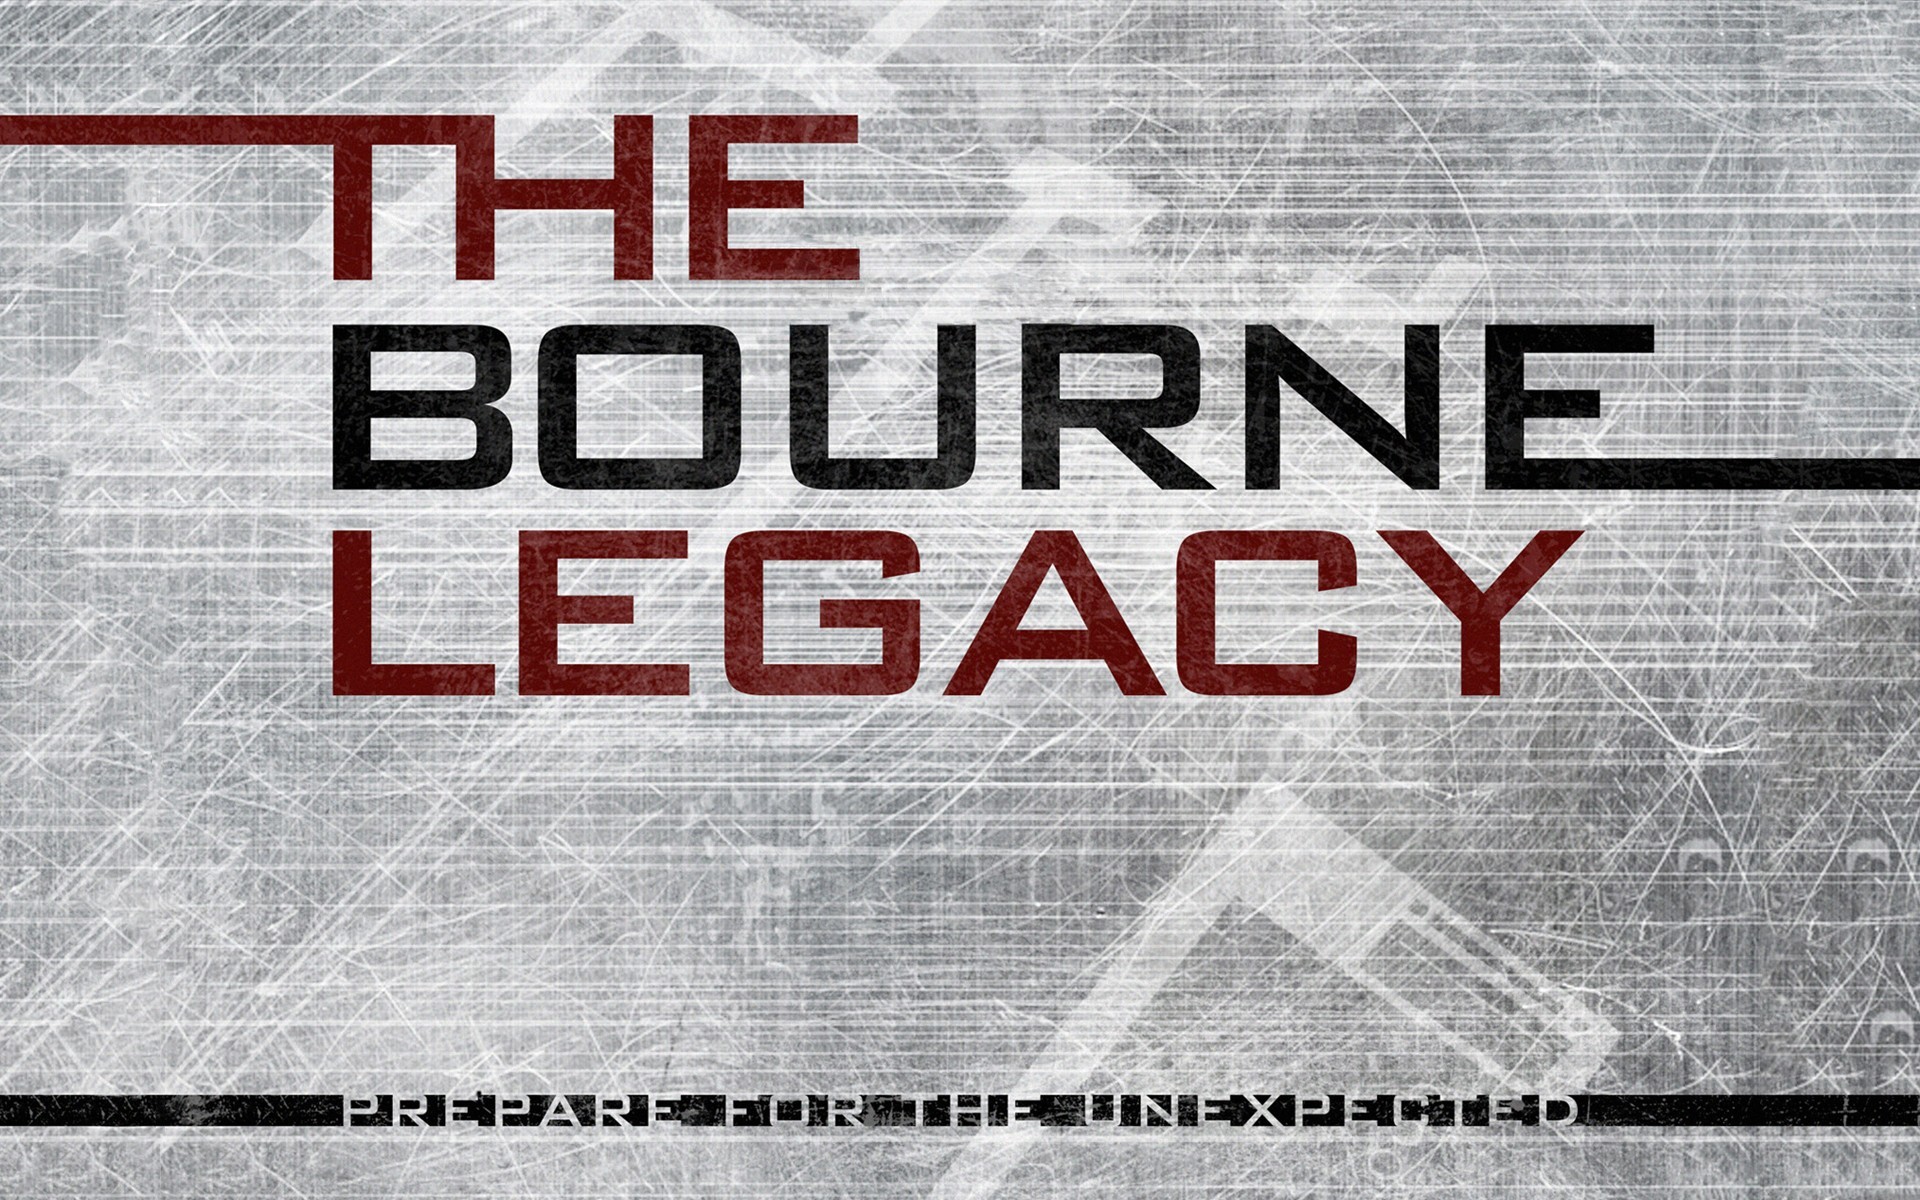 The Bourne Legacy Wallpapers